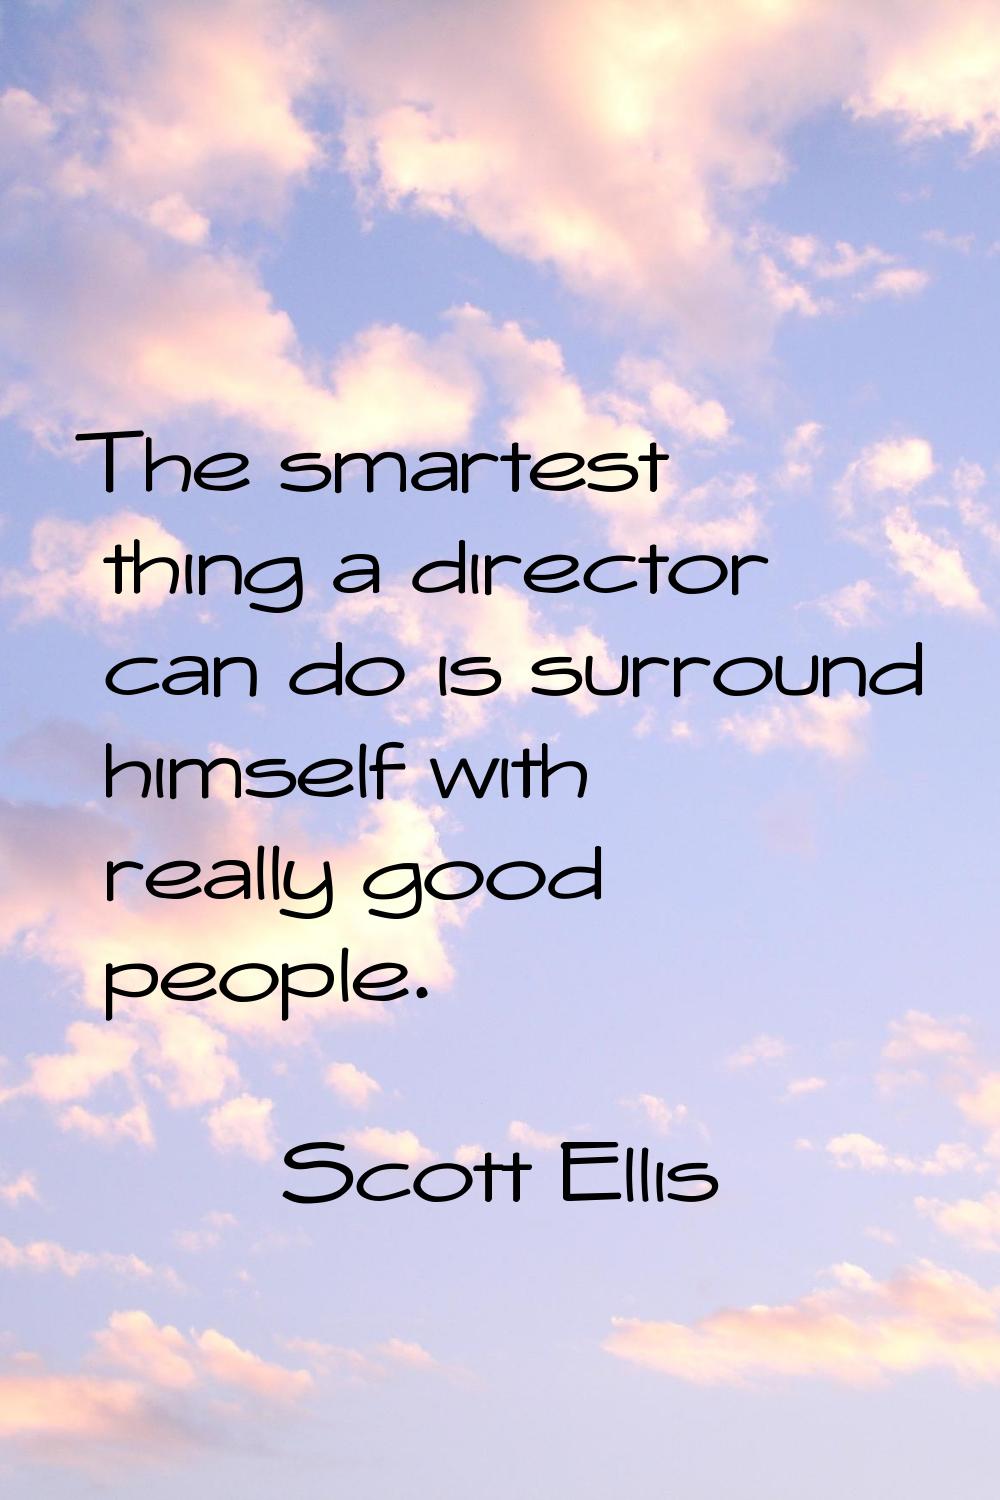 The smartest thing a director can do is surround himself with really good people.